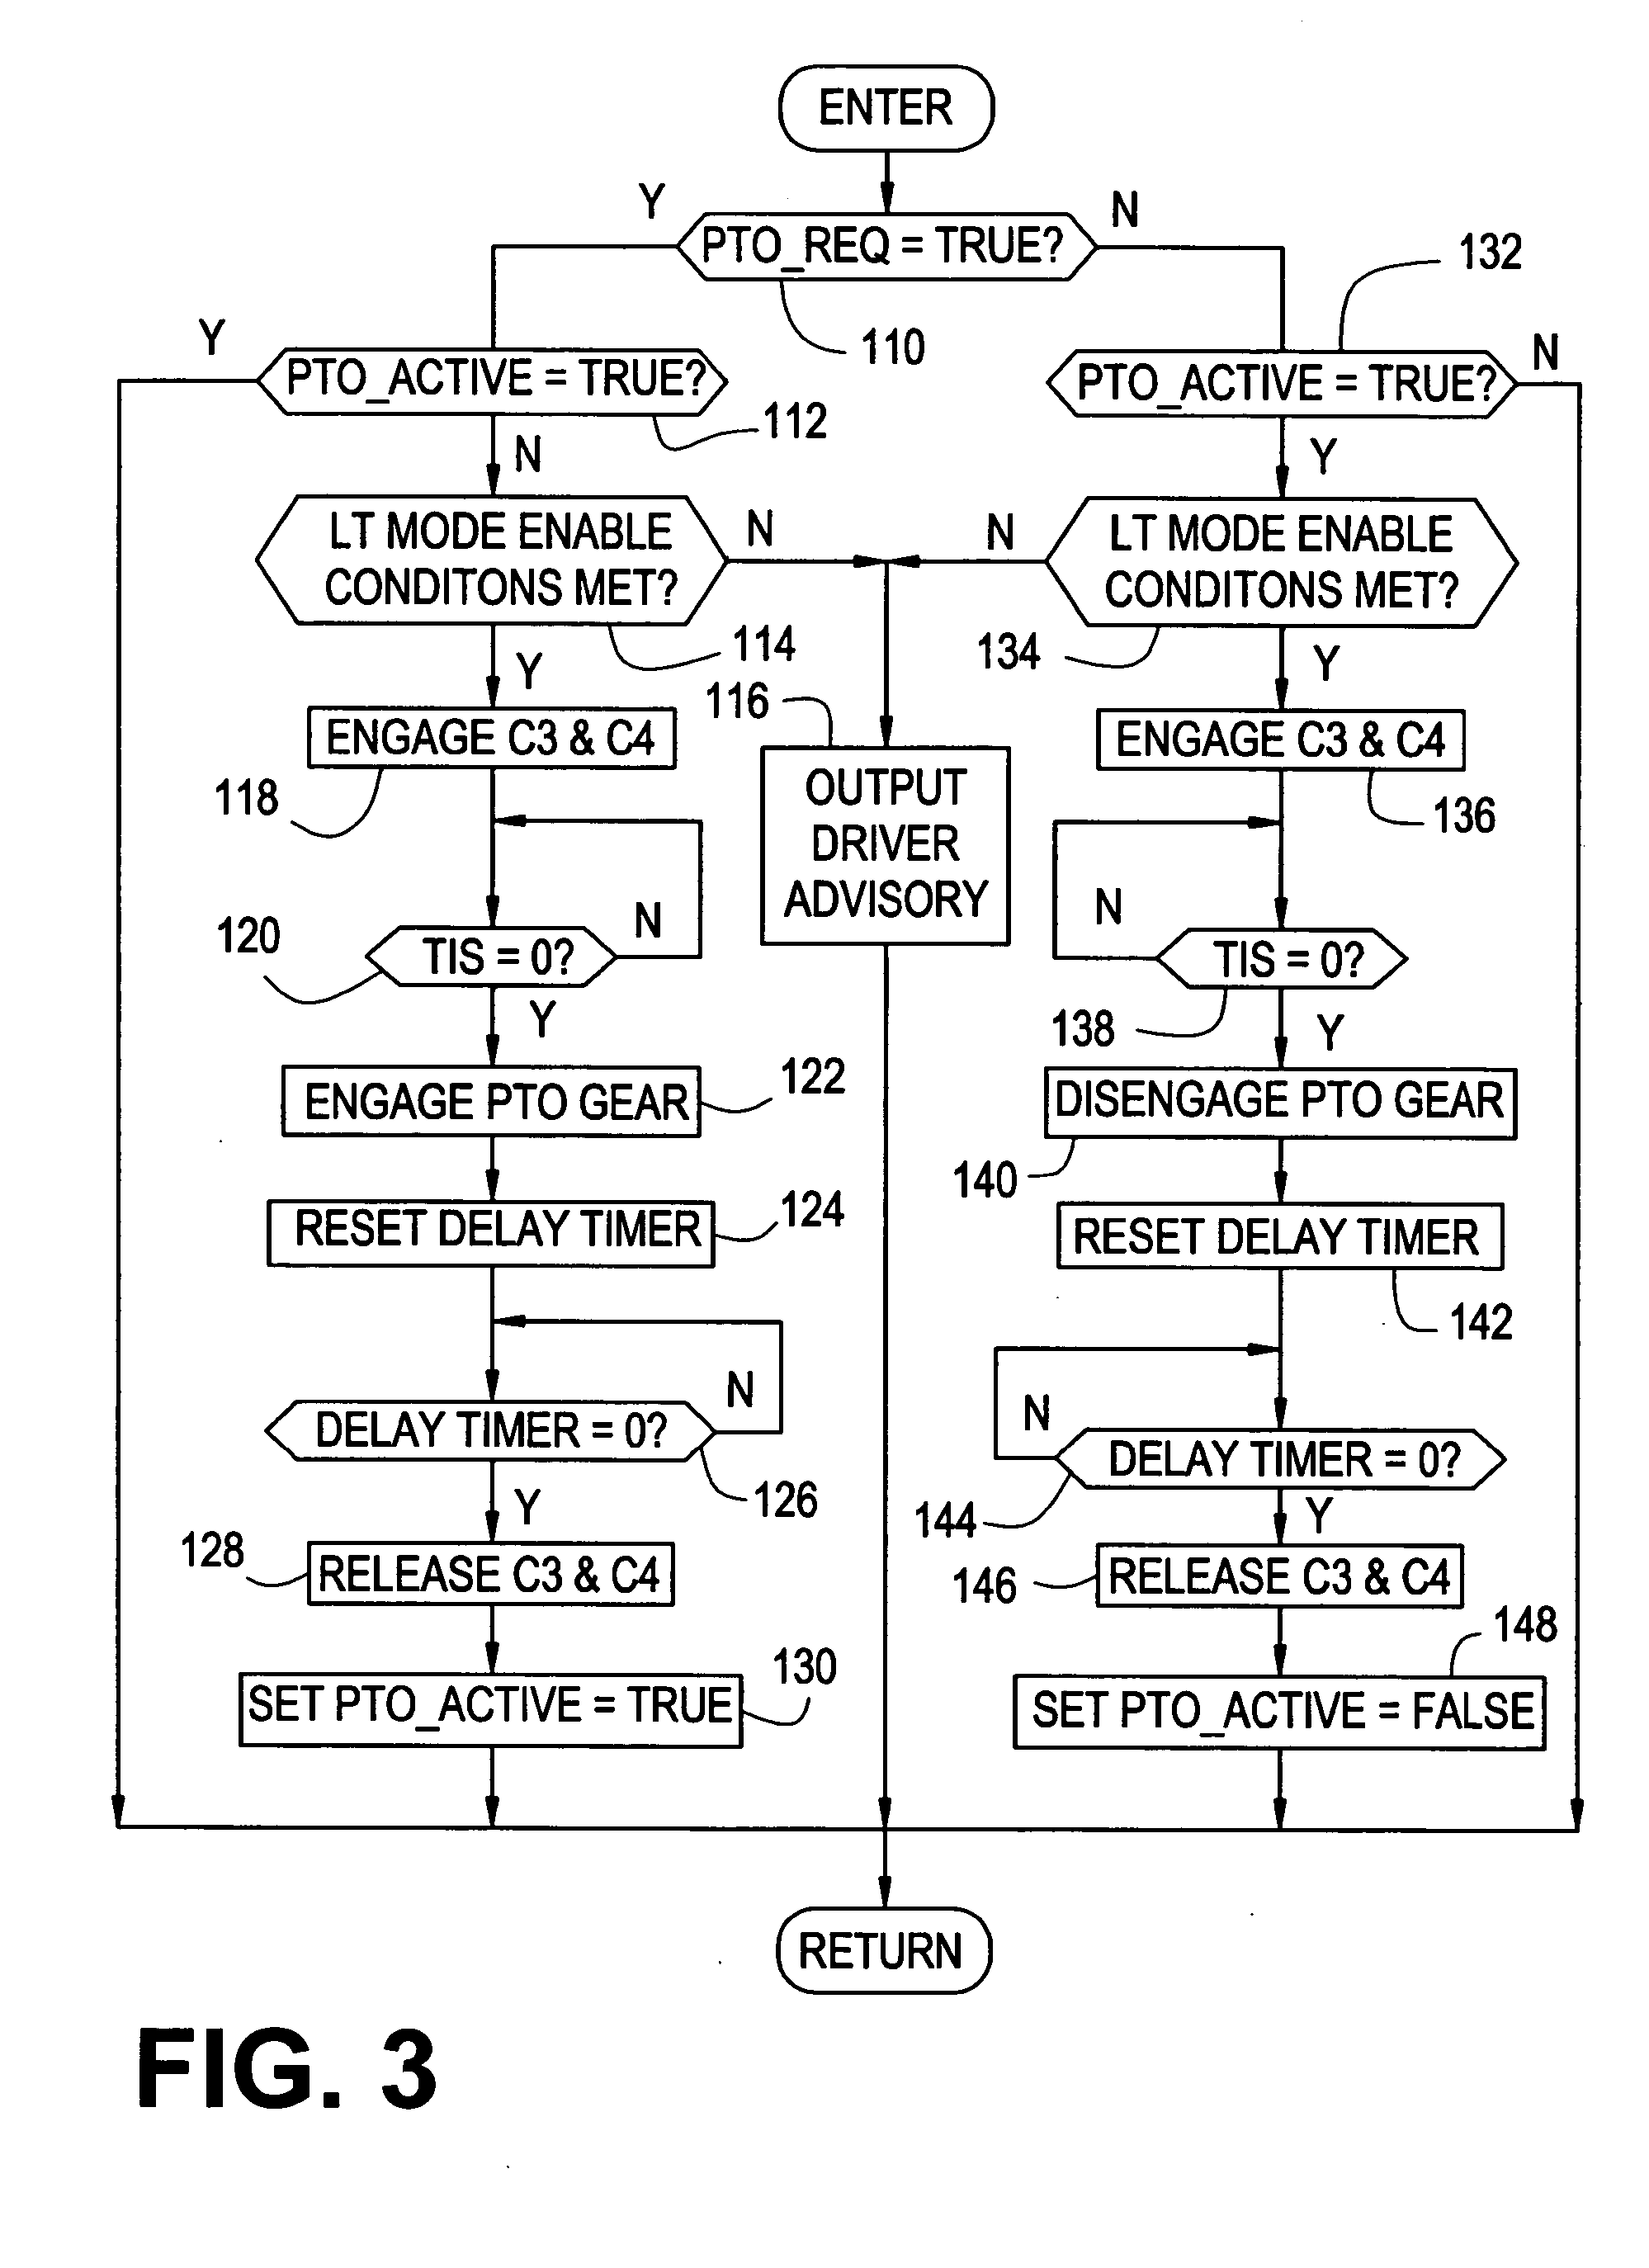 Method and apparatus for synchronized PTO control in a motor vehicle powertrain